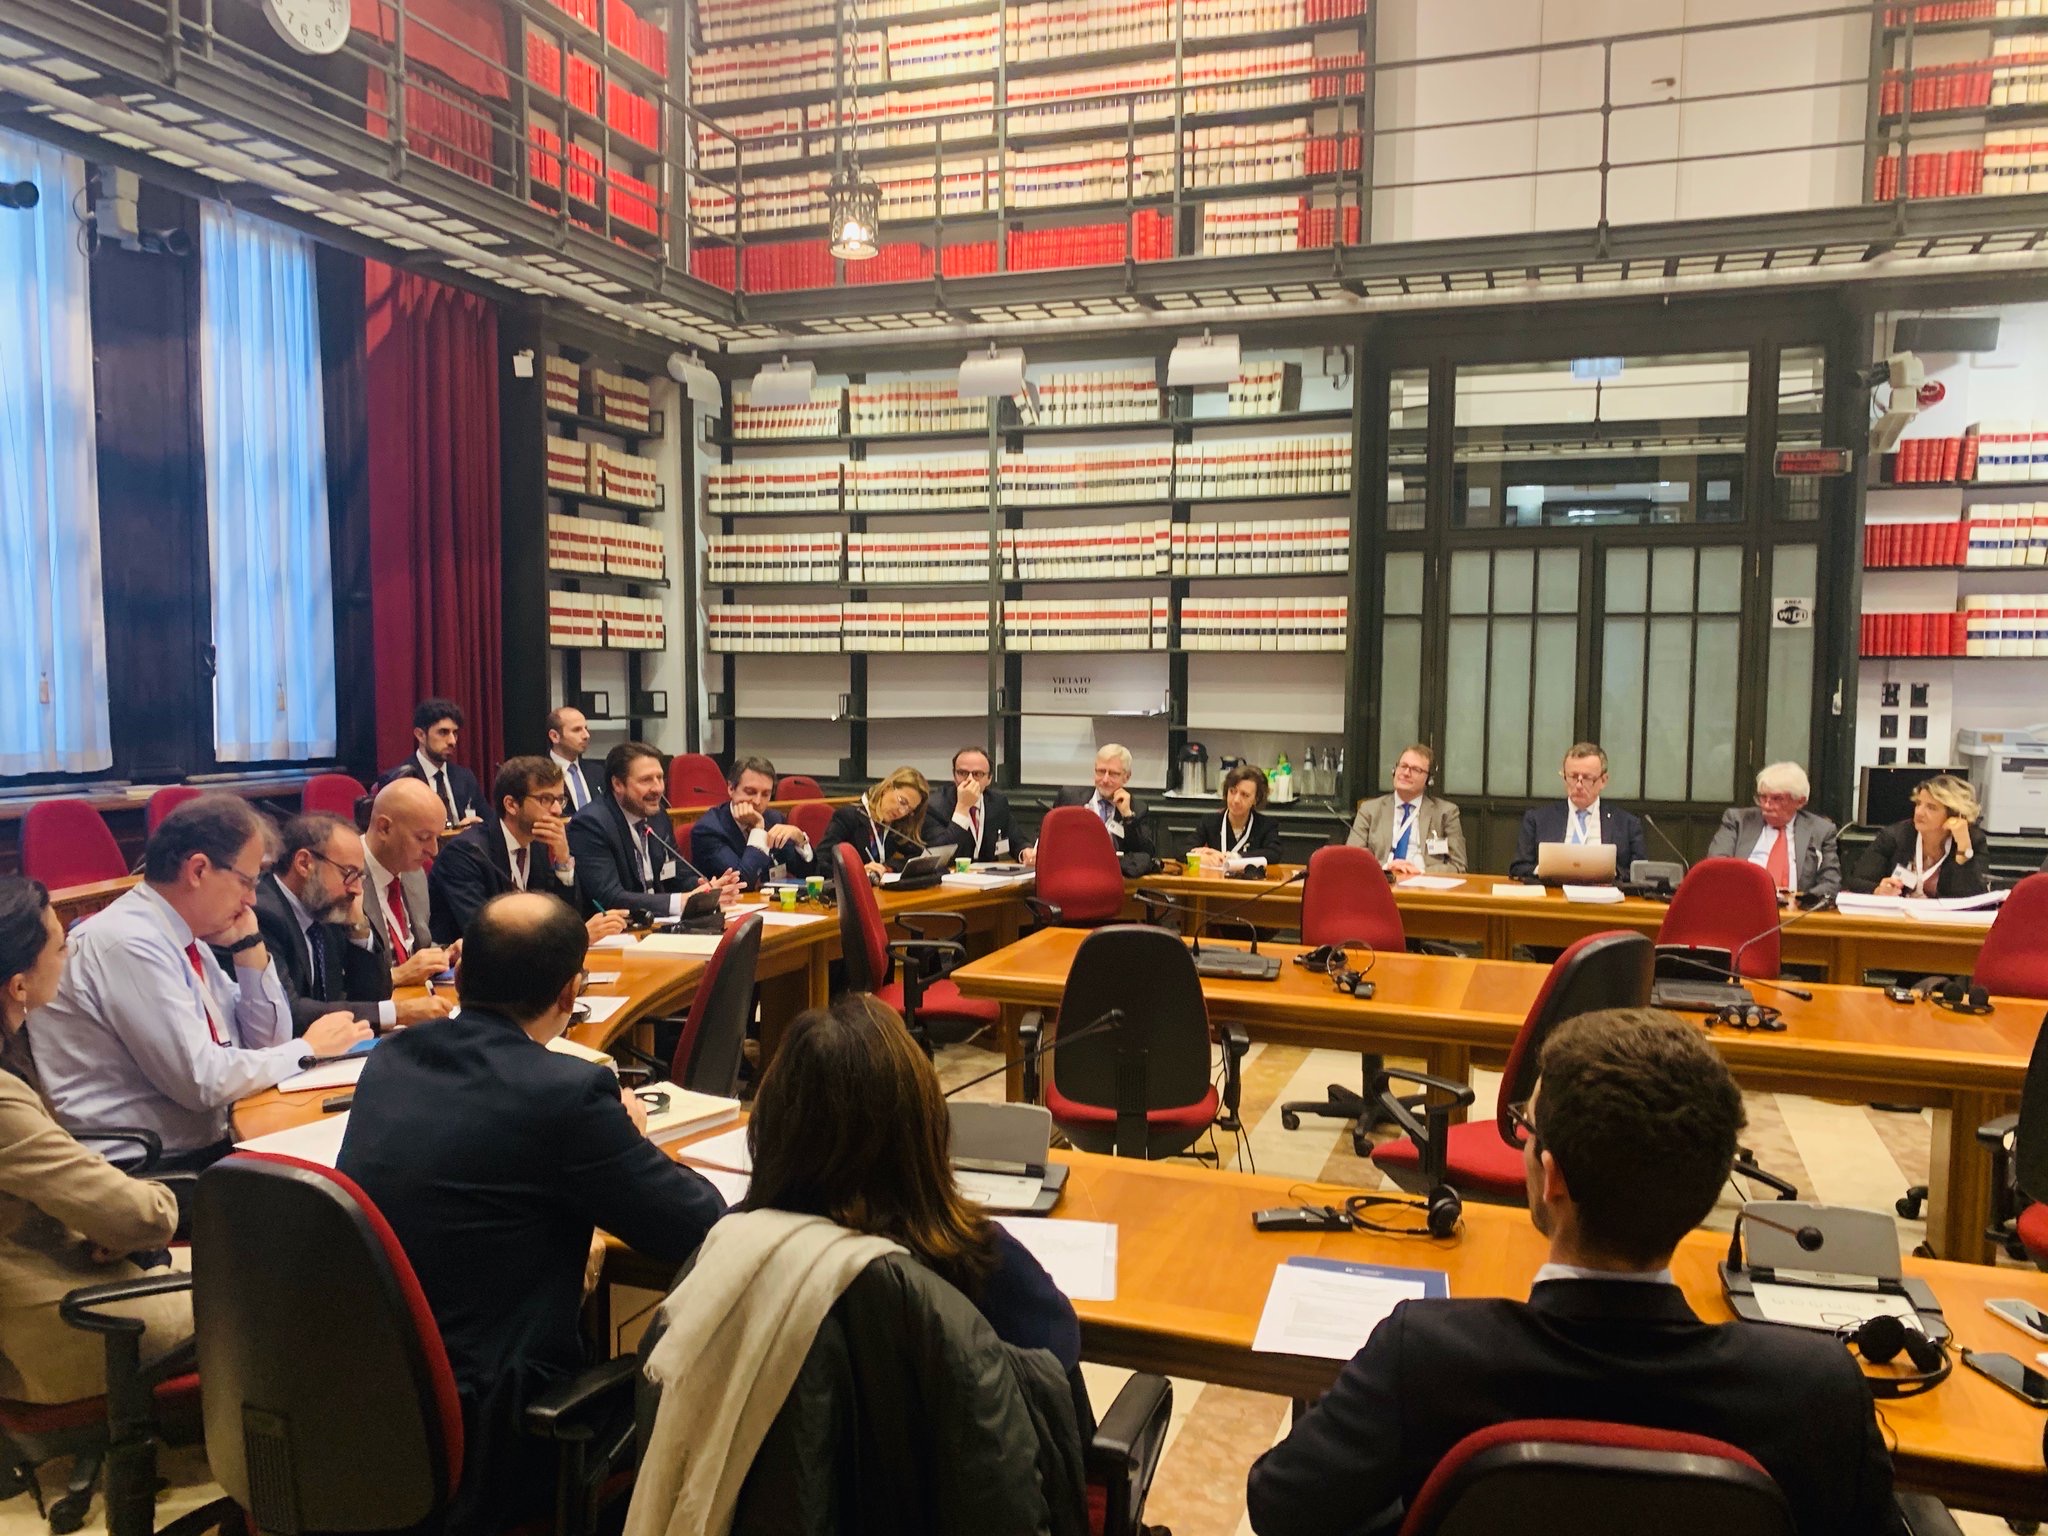 Conference on Ethics and Law of AI, Italian Parliament, Rome 2019